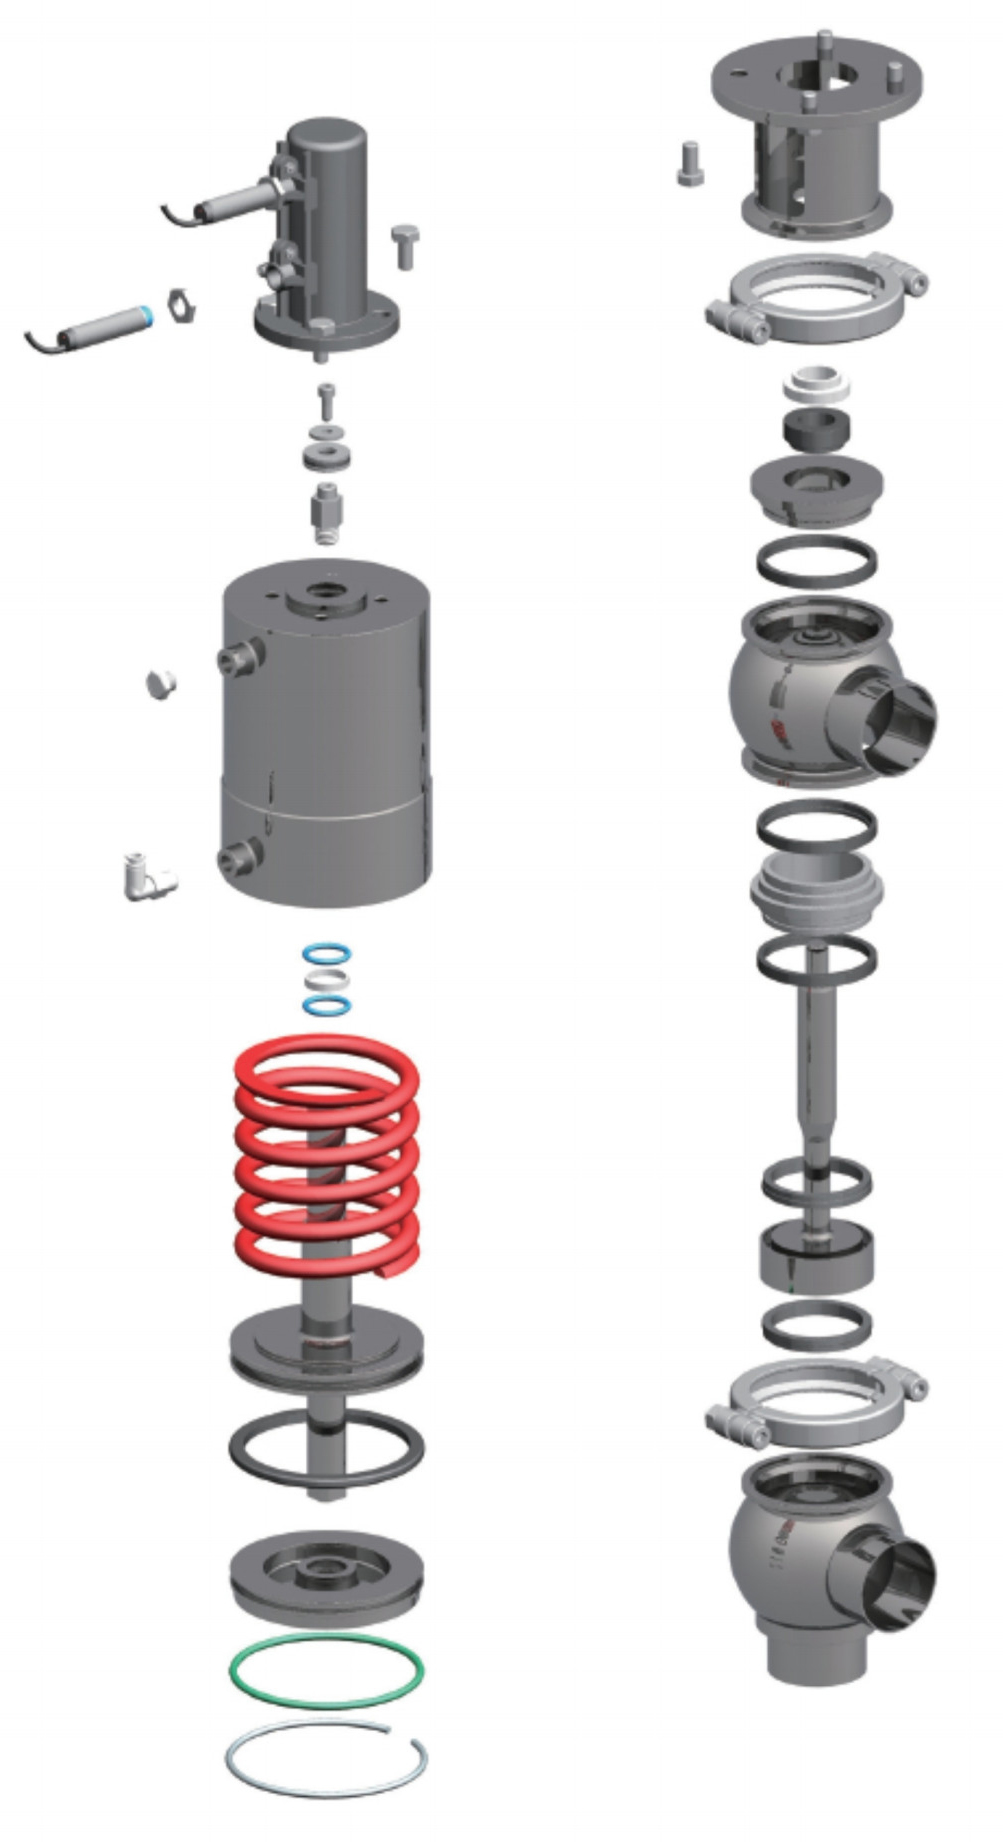 divert-seat-valve-exploded-view